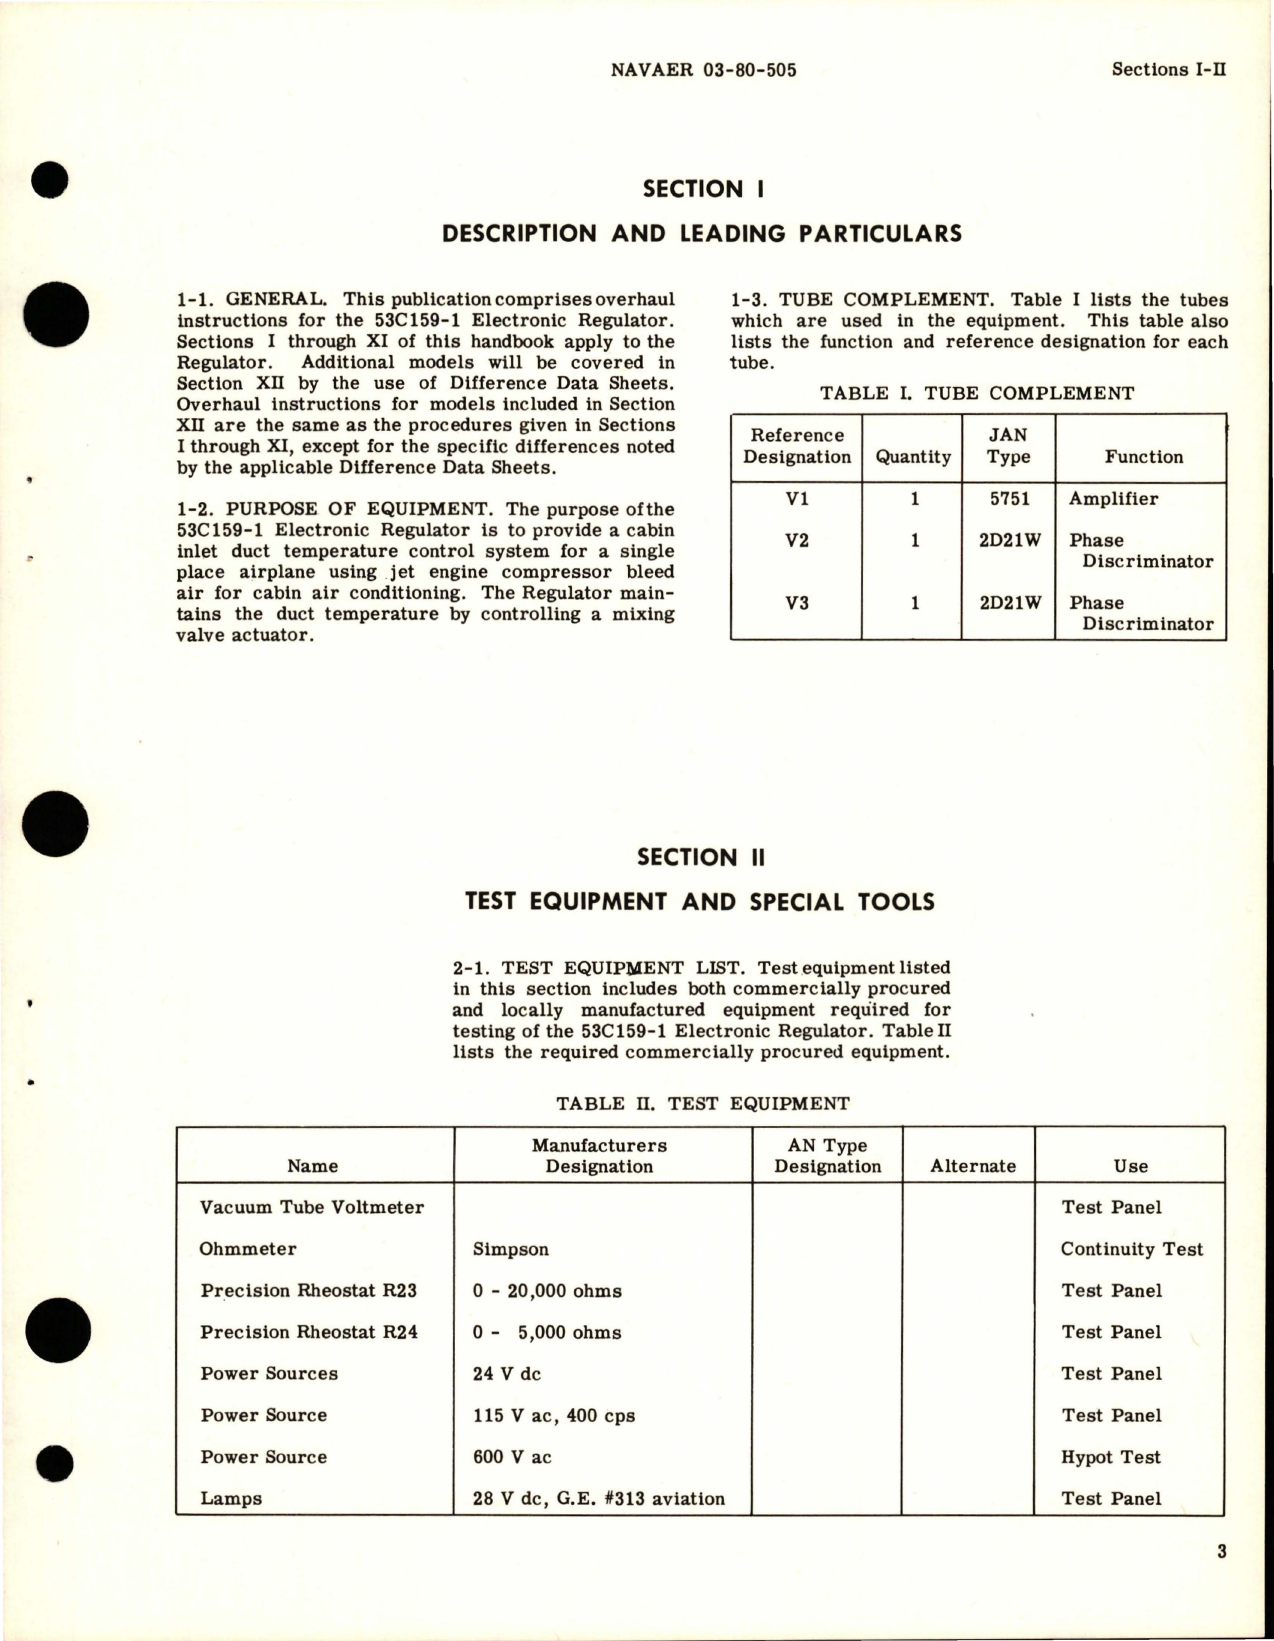 Sample page 7 from AirCorps Library document: Overhaul Instructions for Electronic Regulator - 53C159-1